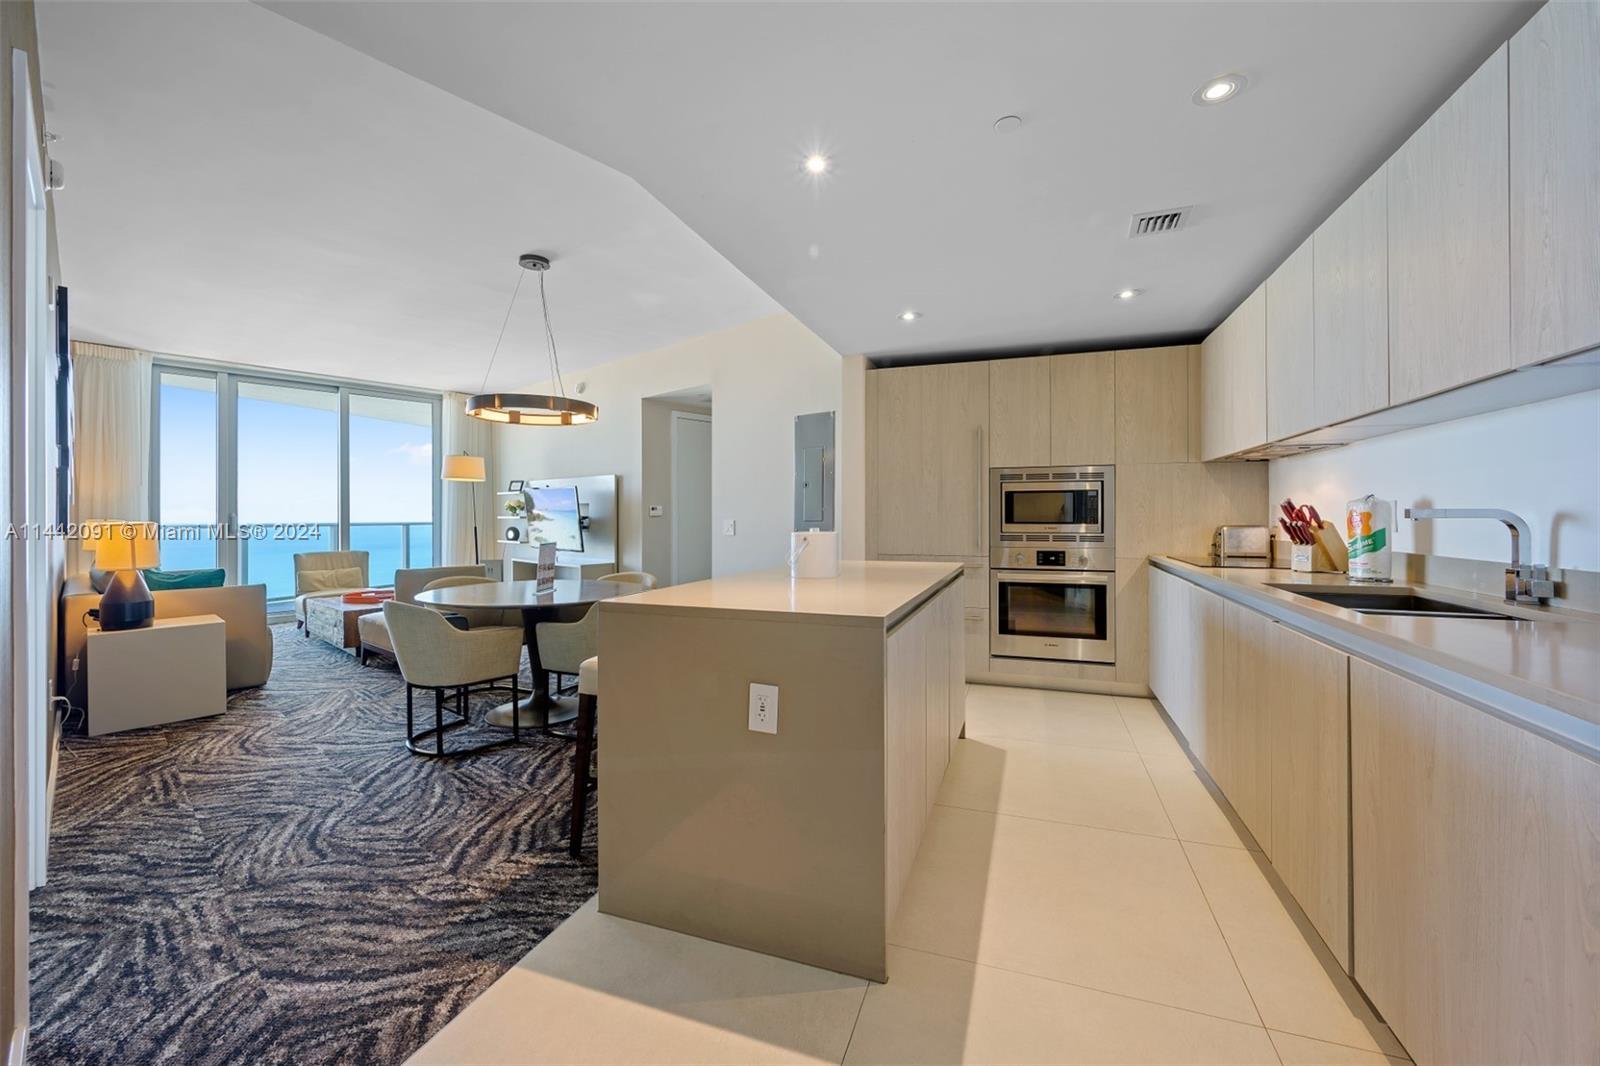 Photo of 4111 S Ocean Dr #3004 in Hollywood, FL